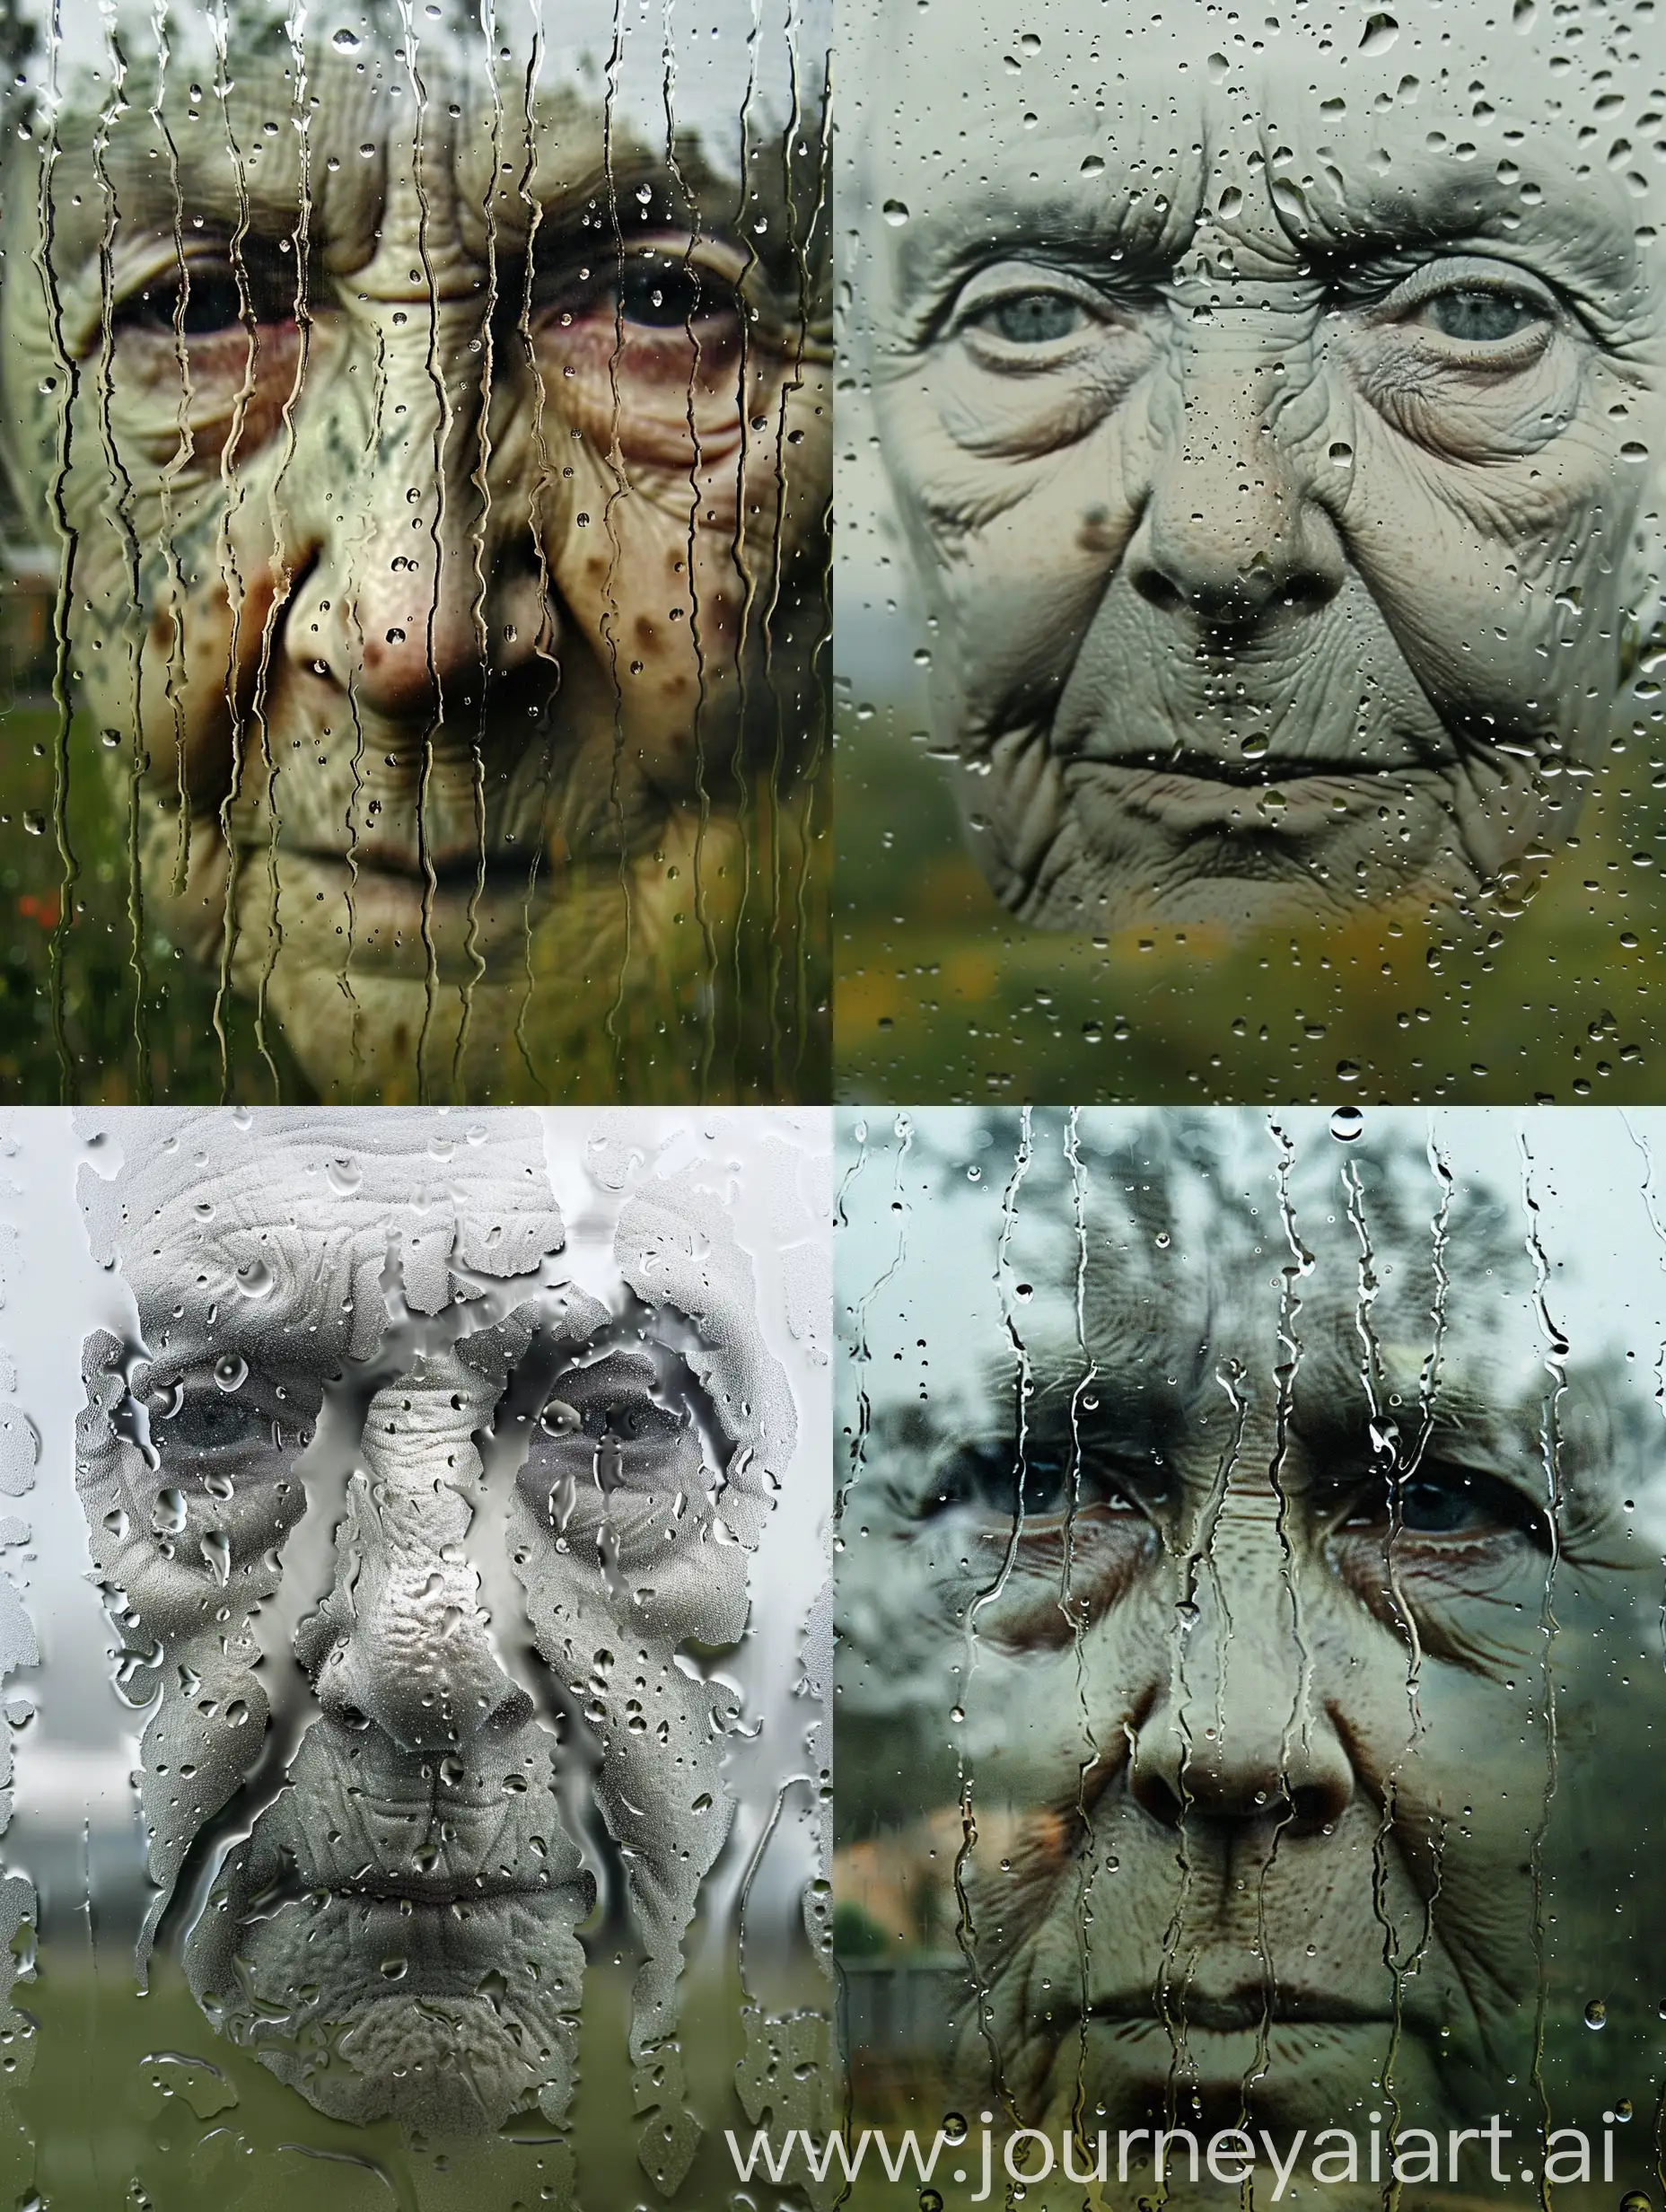 An artistically form of a delicate and depressed face of a elder woman formed entirely by natural moist areas, condensation, raindrops, and drip lines on a rain wet window pane. The artistic rendition emphasizes a minimalistic approach, with each facial detail—eyes, nose, mouth, eyebrows—finely shaped by the natural accumulation of moisture and subtle shadows. The blurry landscape accents from the outdoor subtly contribute to the face's accents